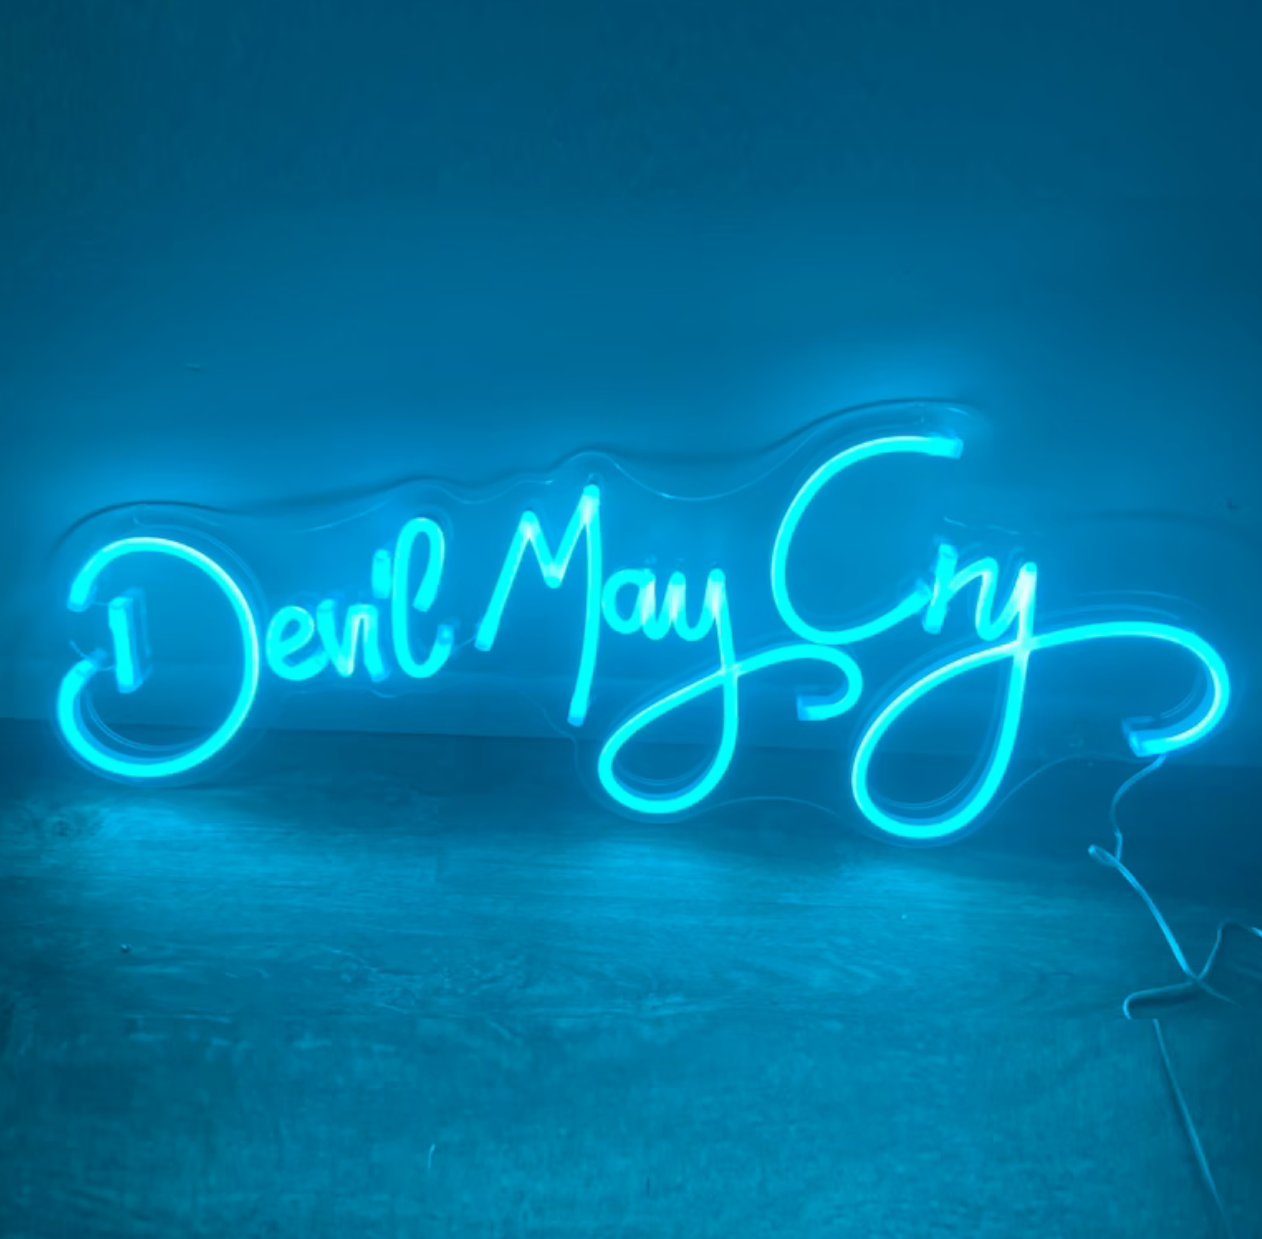 Devil May Cry Neon Sign